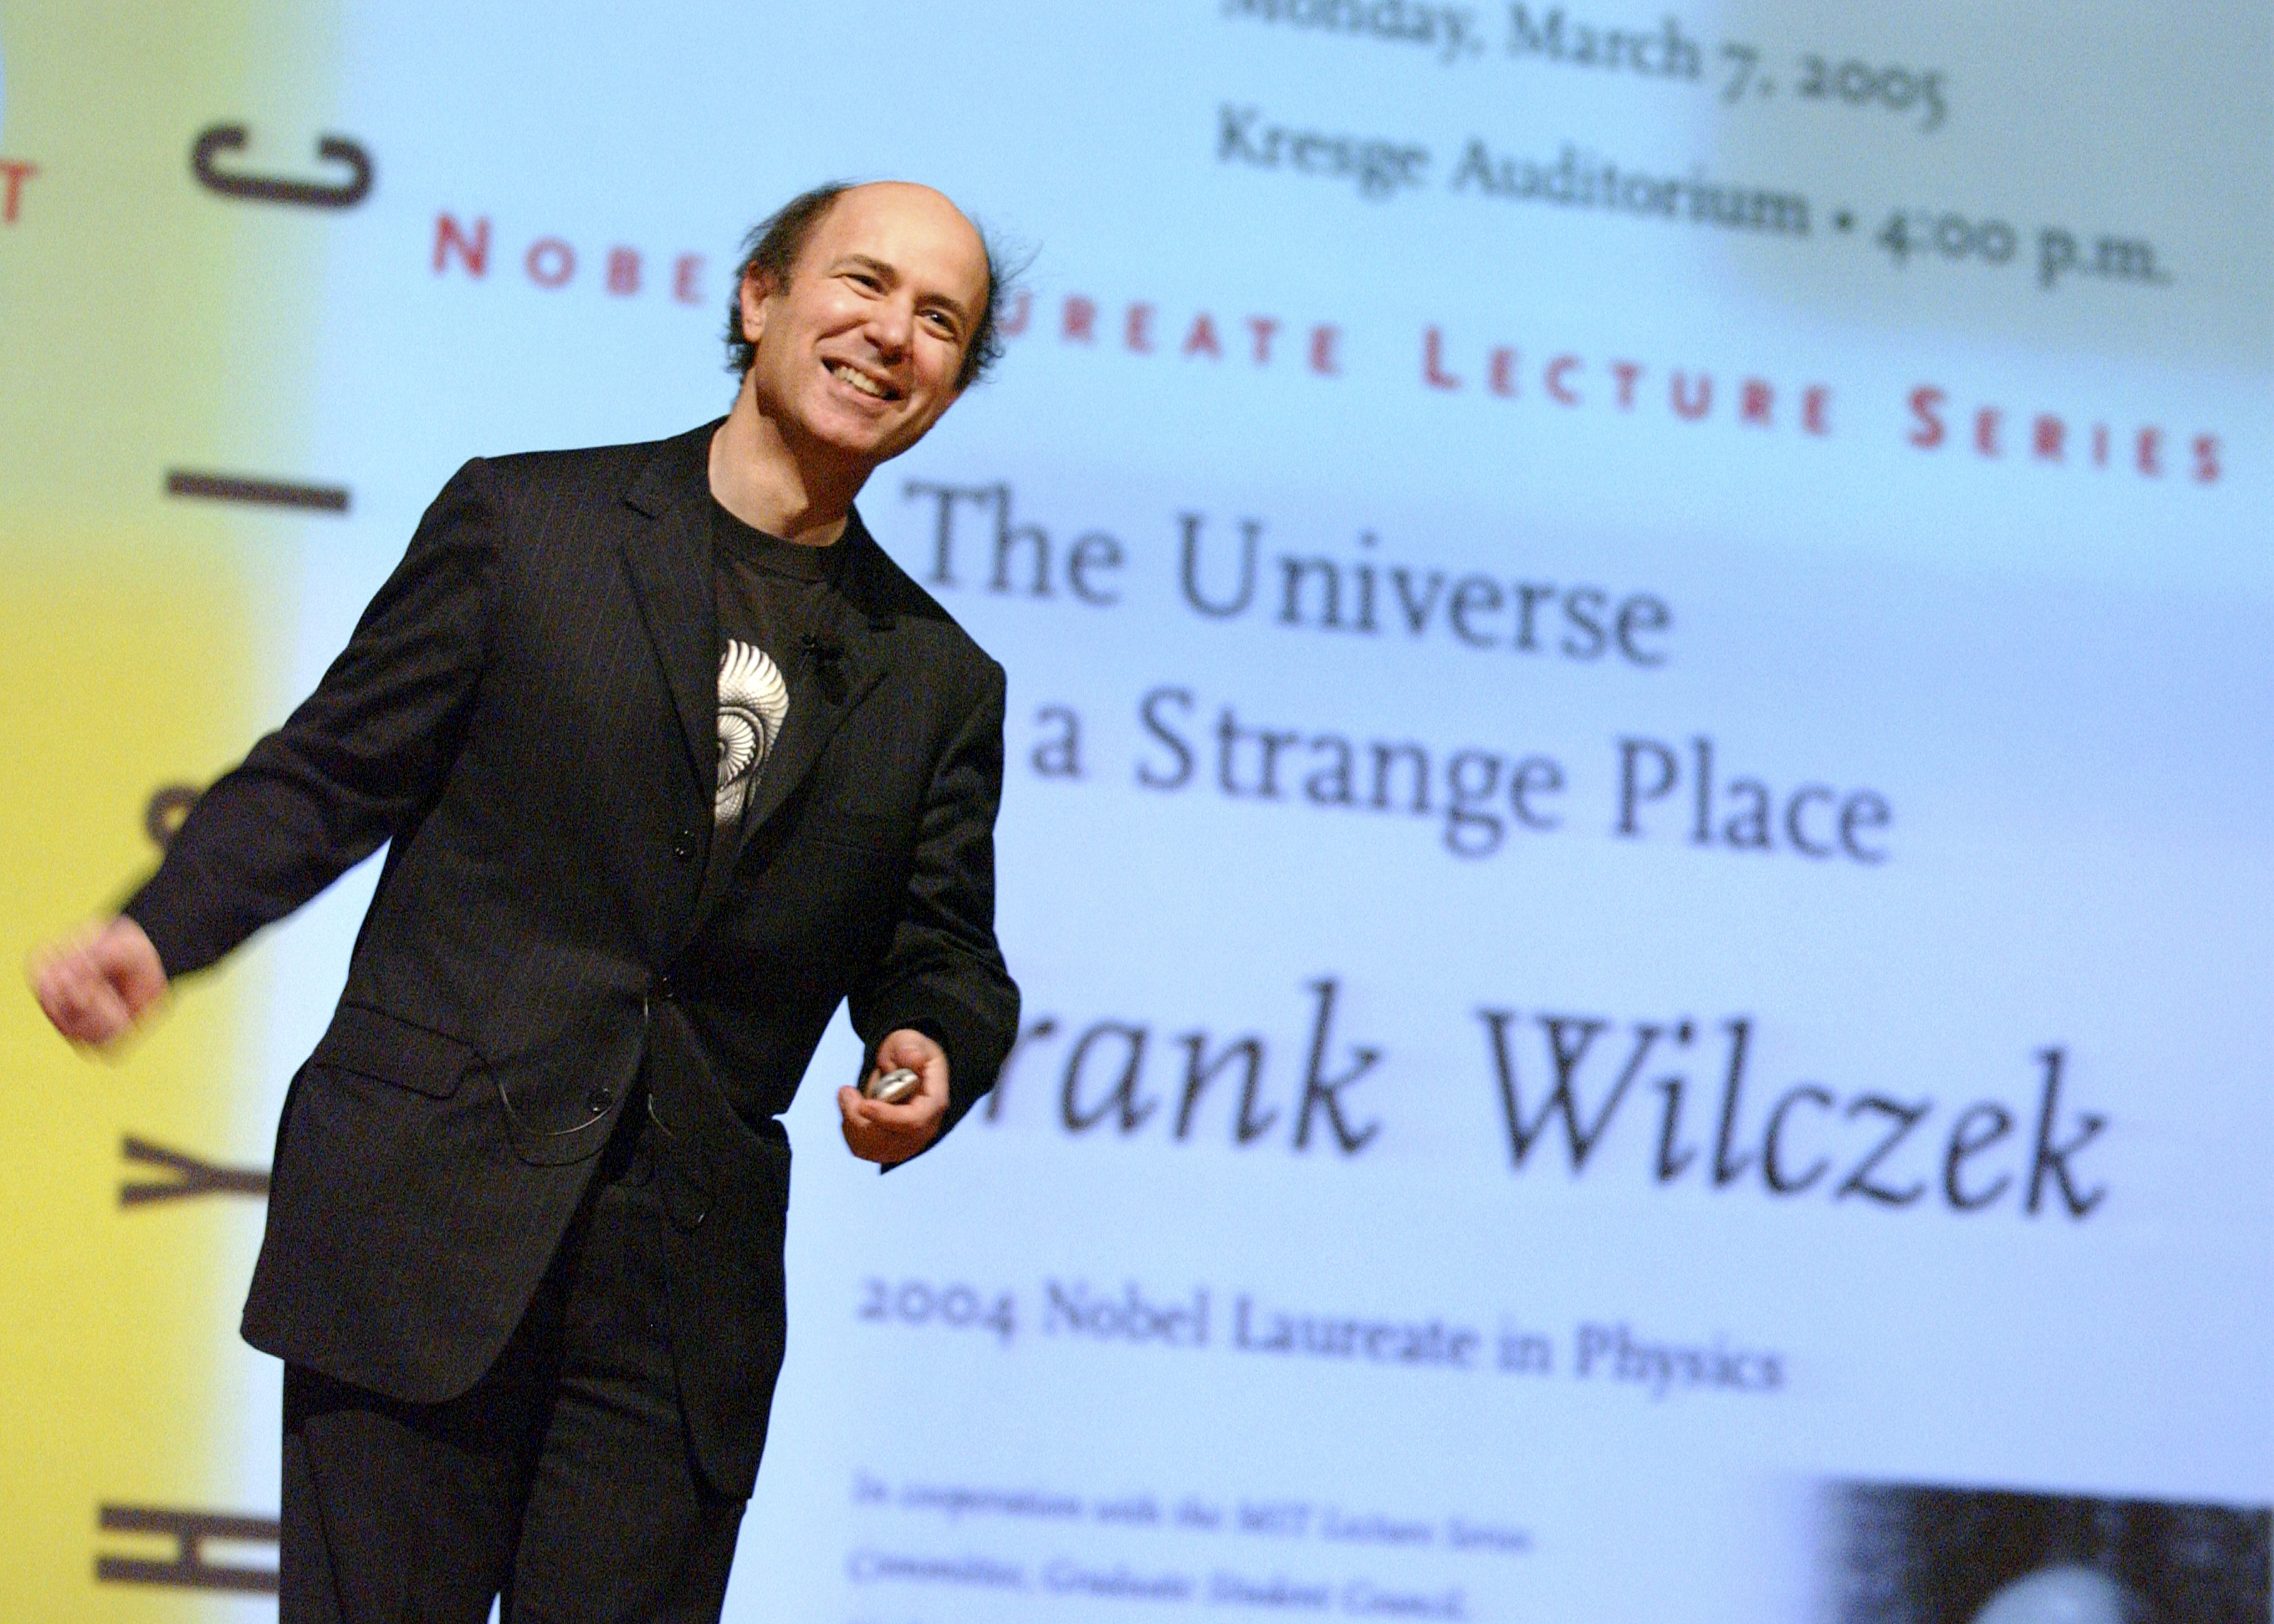 Frank Wilczek, Nobel laureate and theoretical physicist, is seeking the connections between truth and beauty.